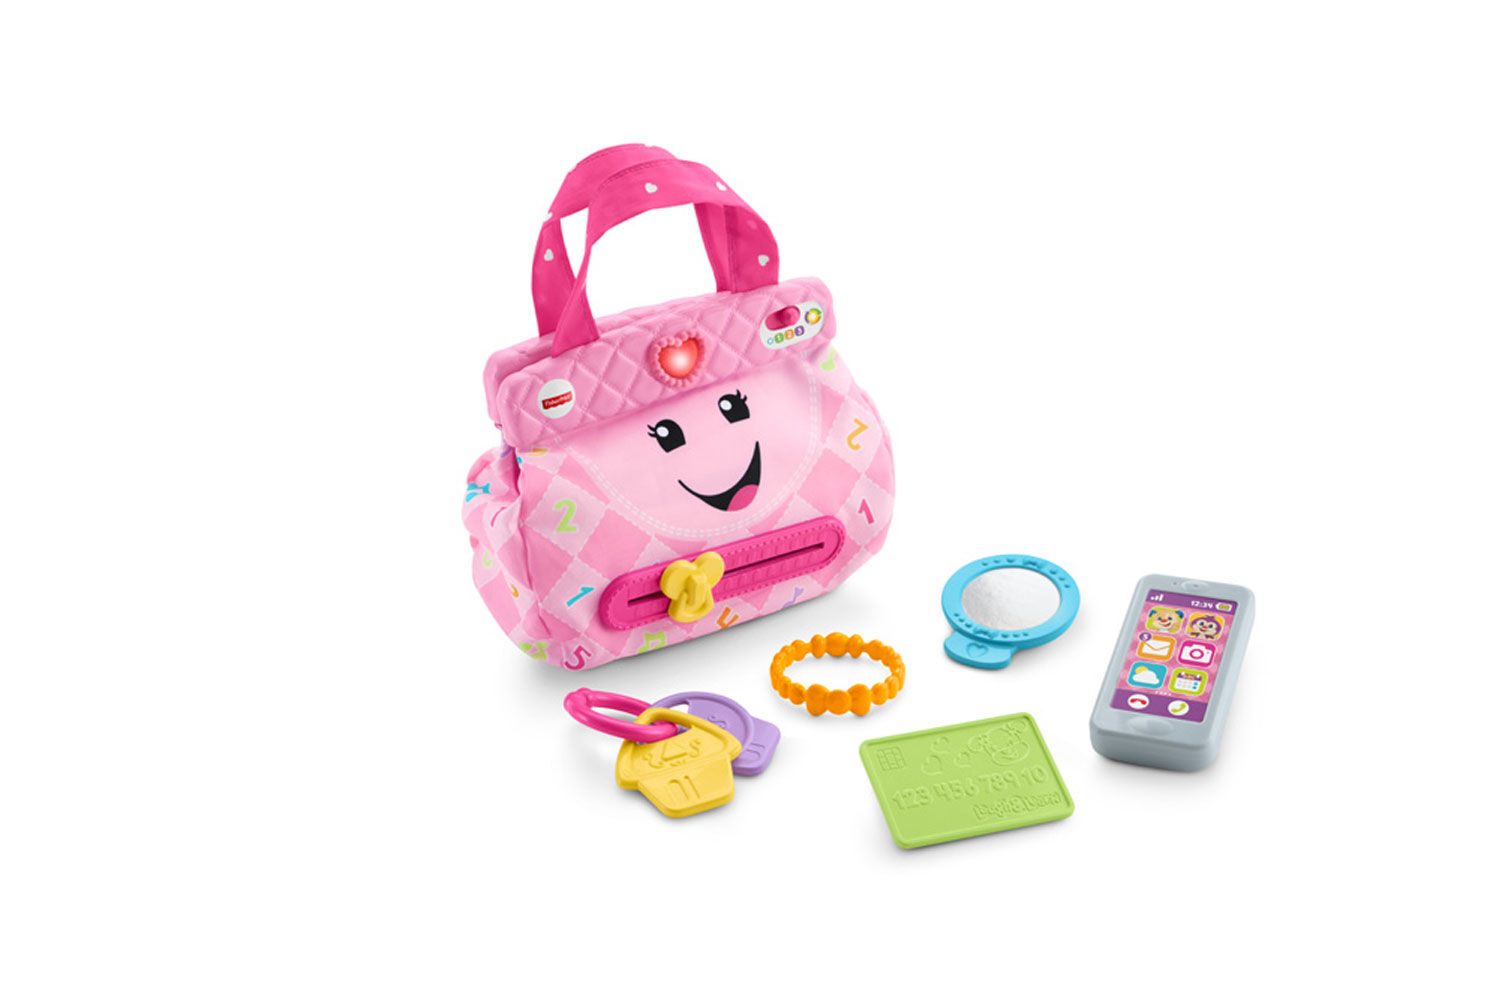 fisher price laugh and learn my smart purse